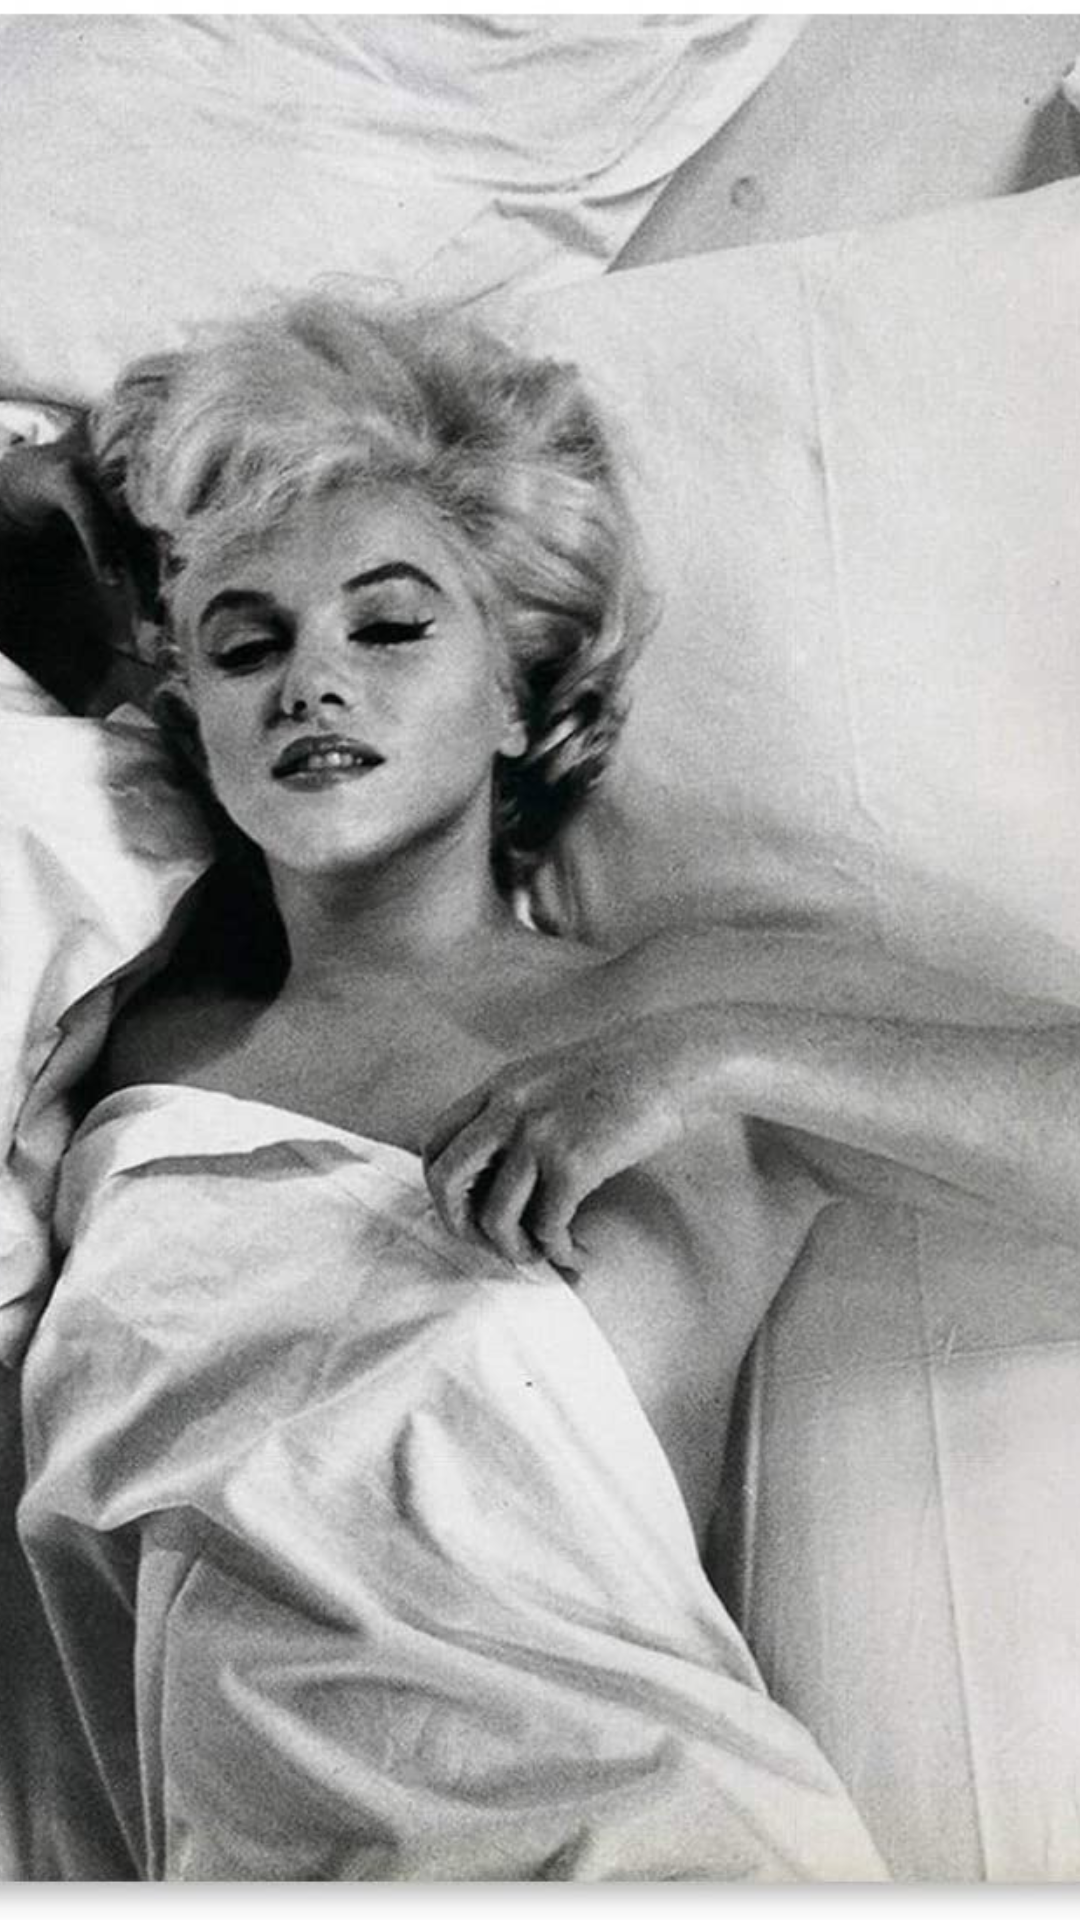 Why Marilyn Monroe is still iconic